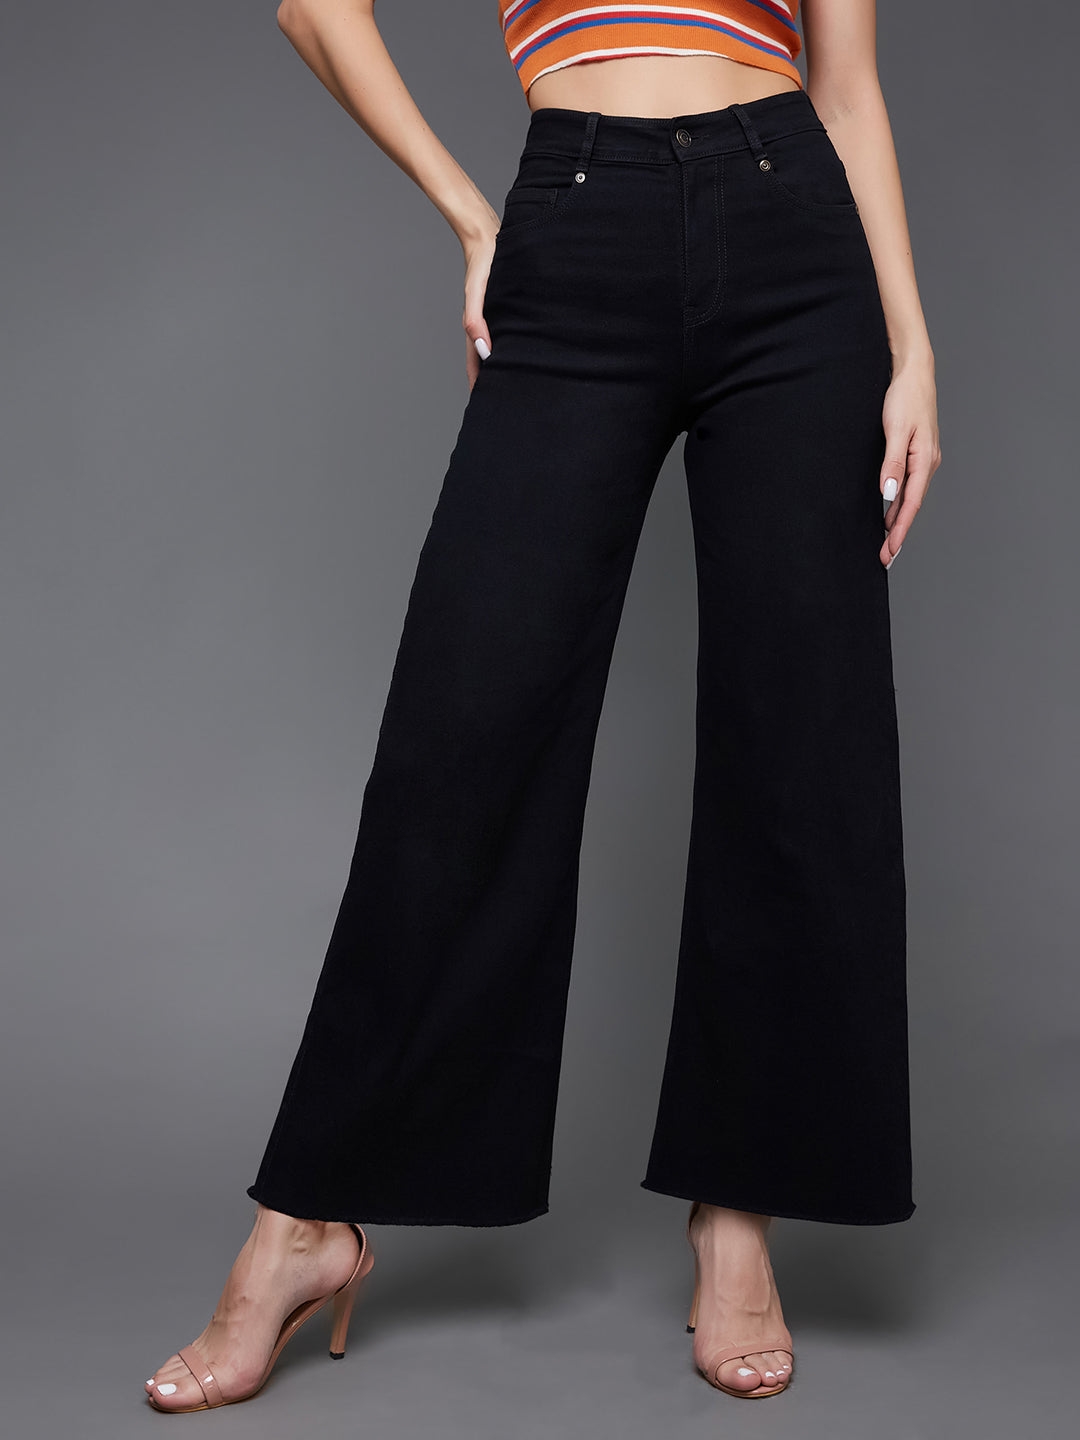 Women's Black Solid Flared Jeans